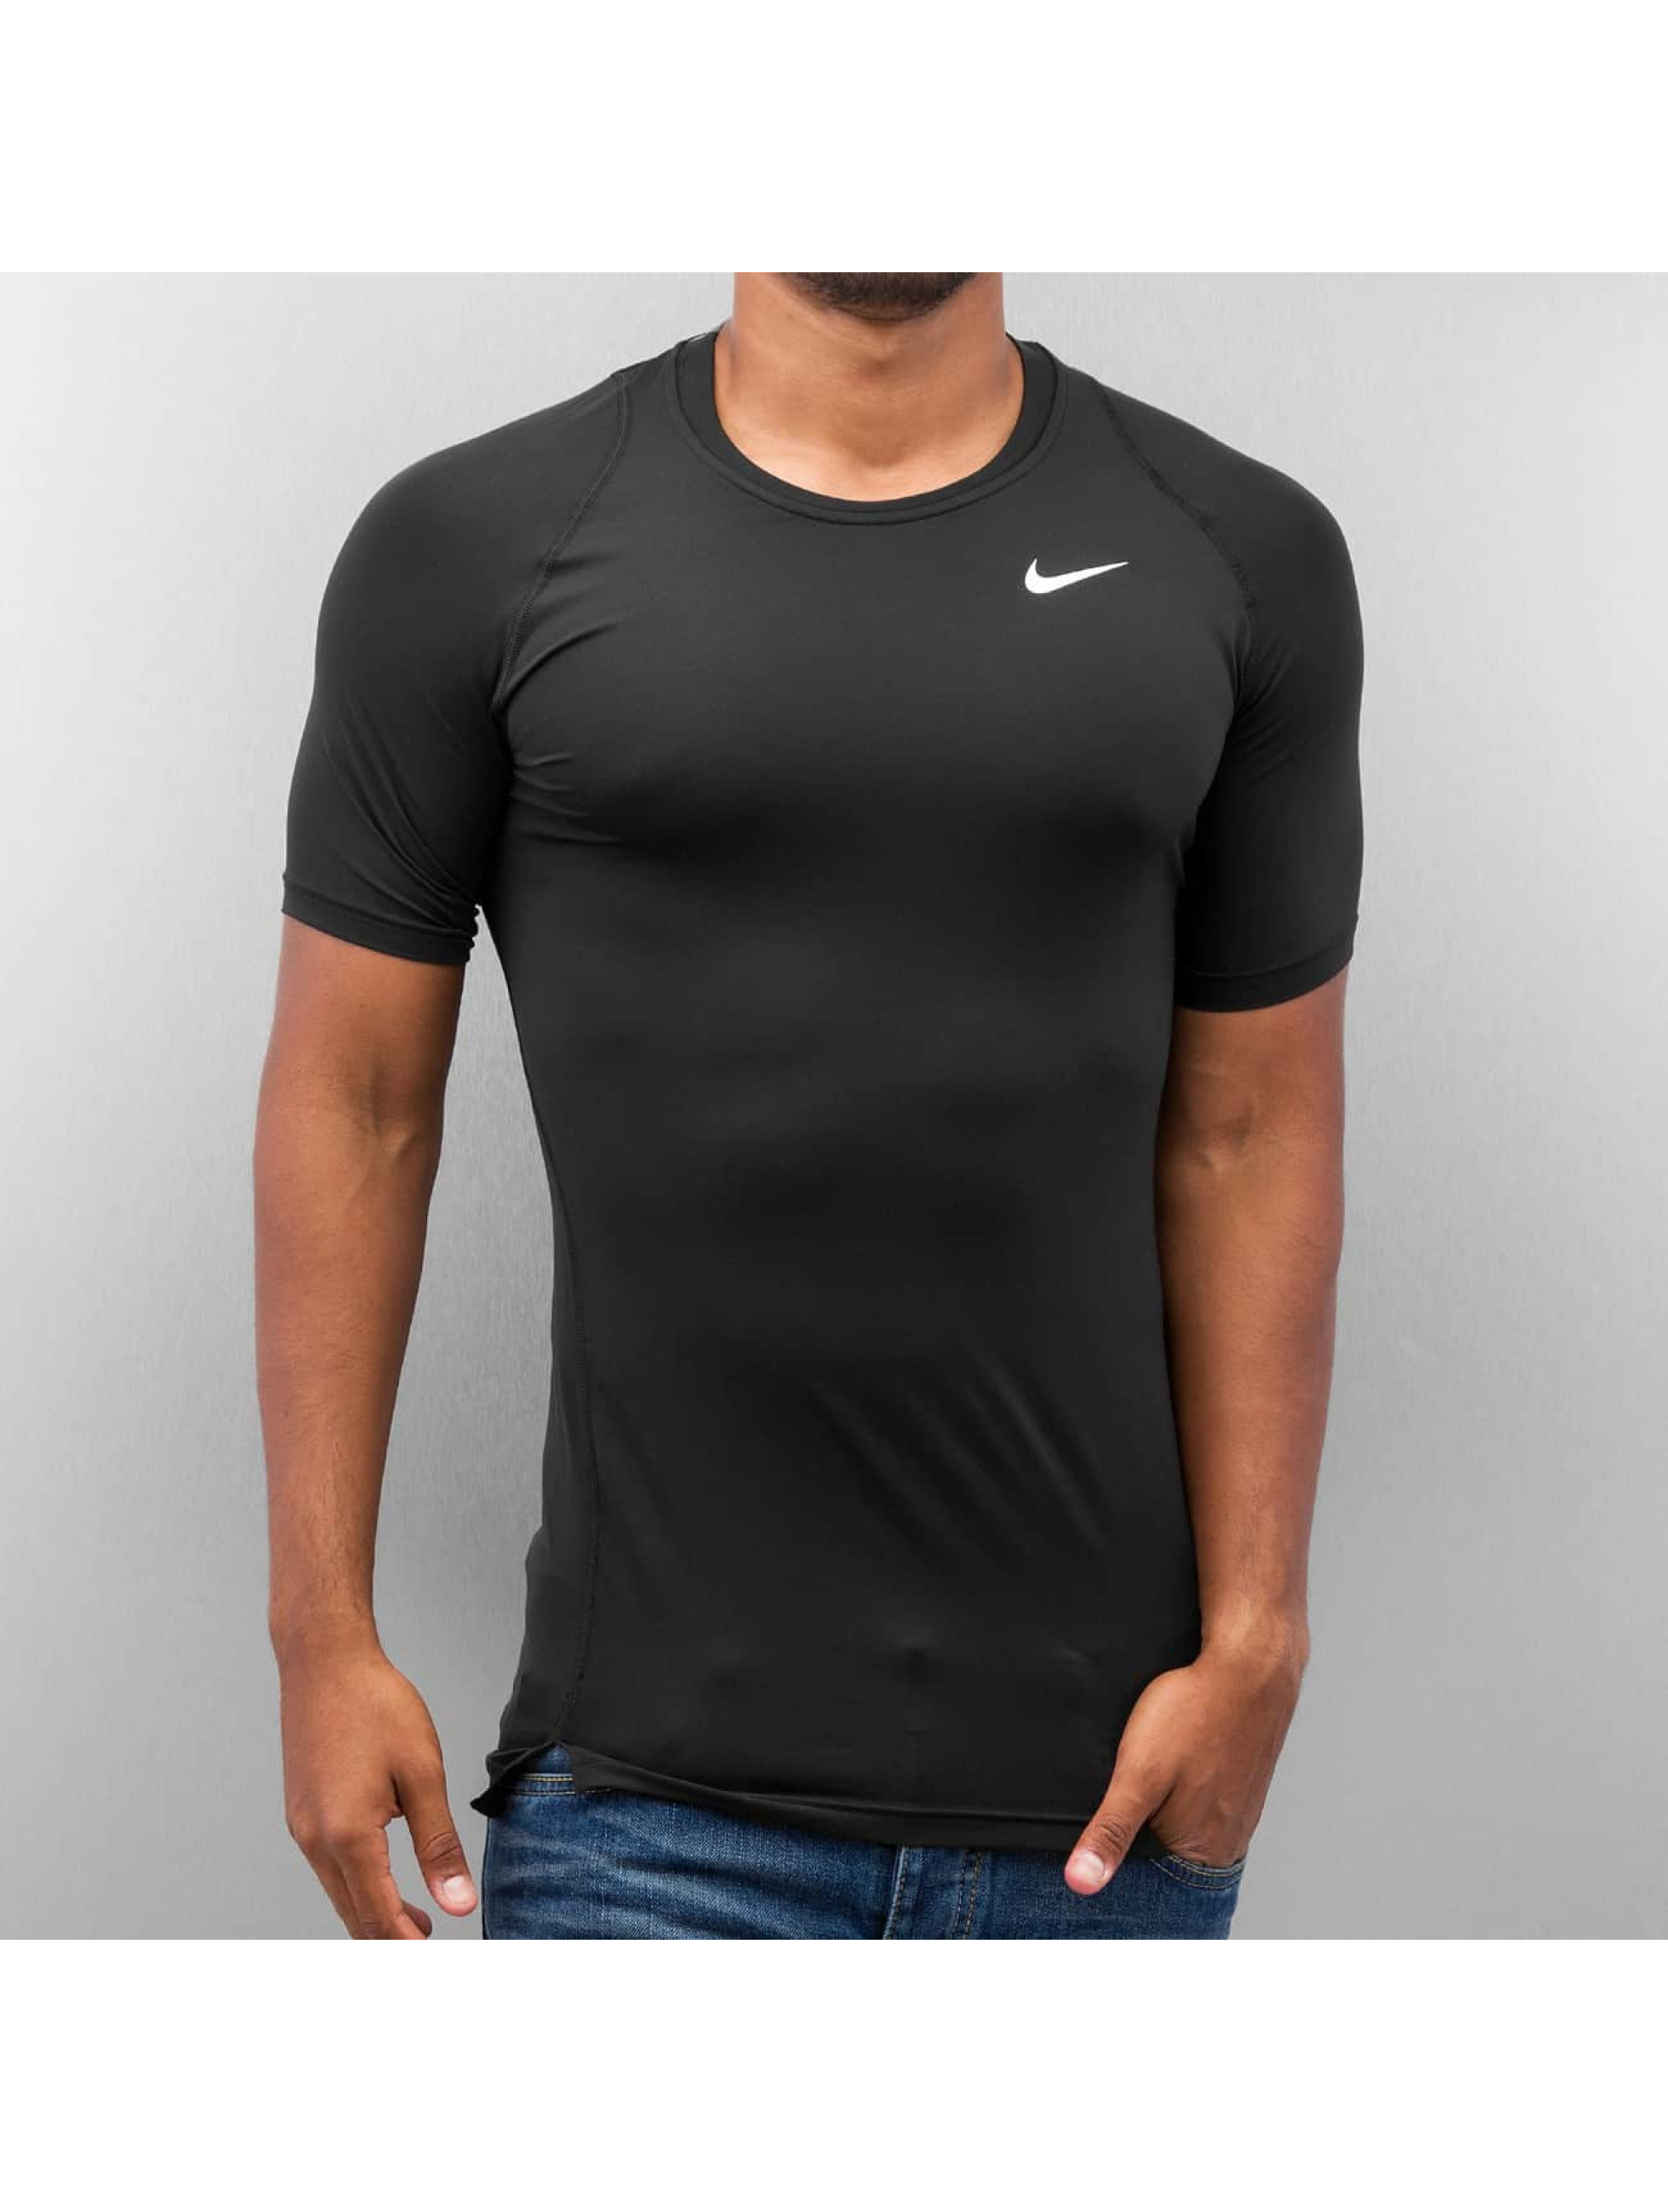 T-Shirt Pro Cool Compression in schwarz